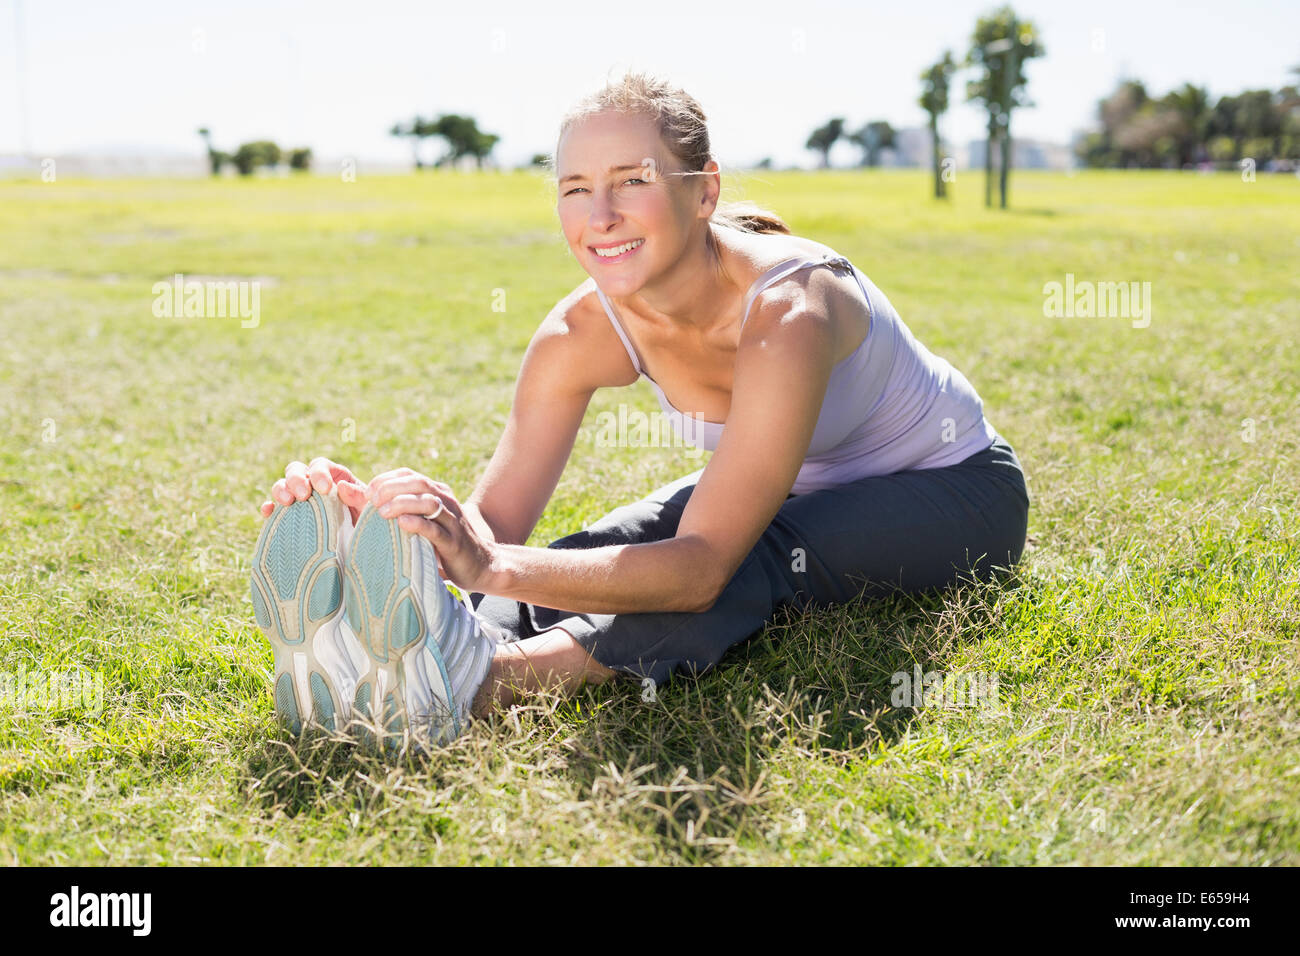 Fit mature woman warming up on the grass Stock Photo